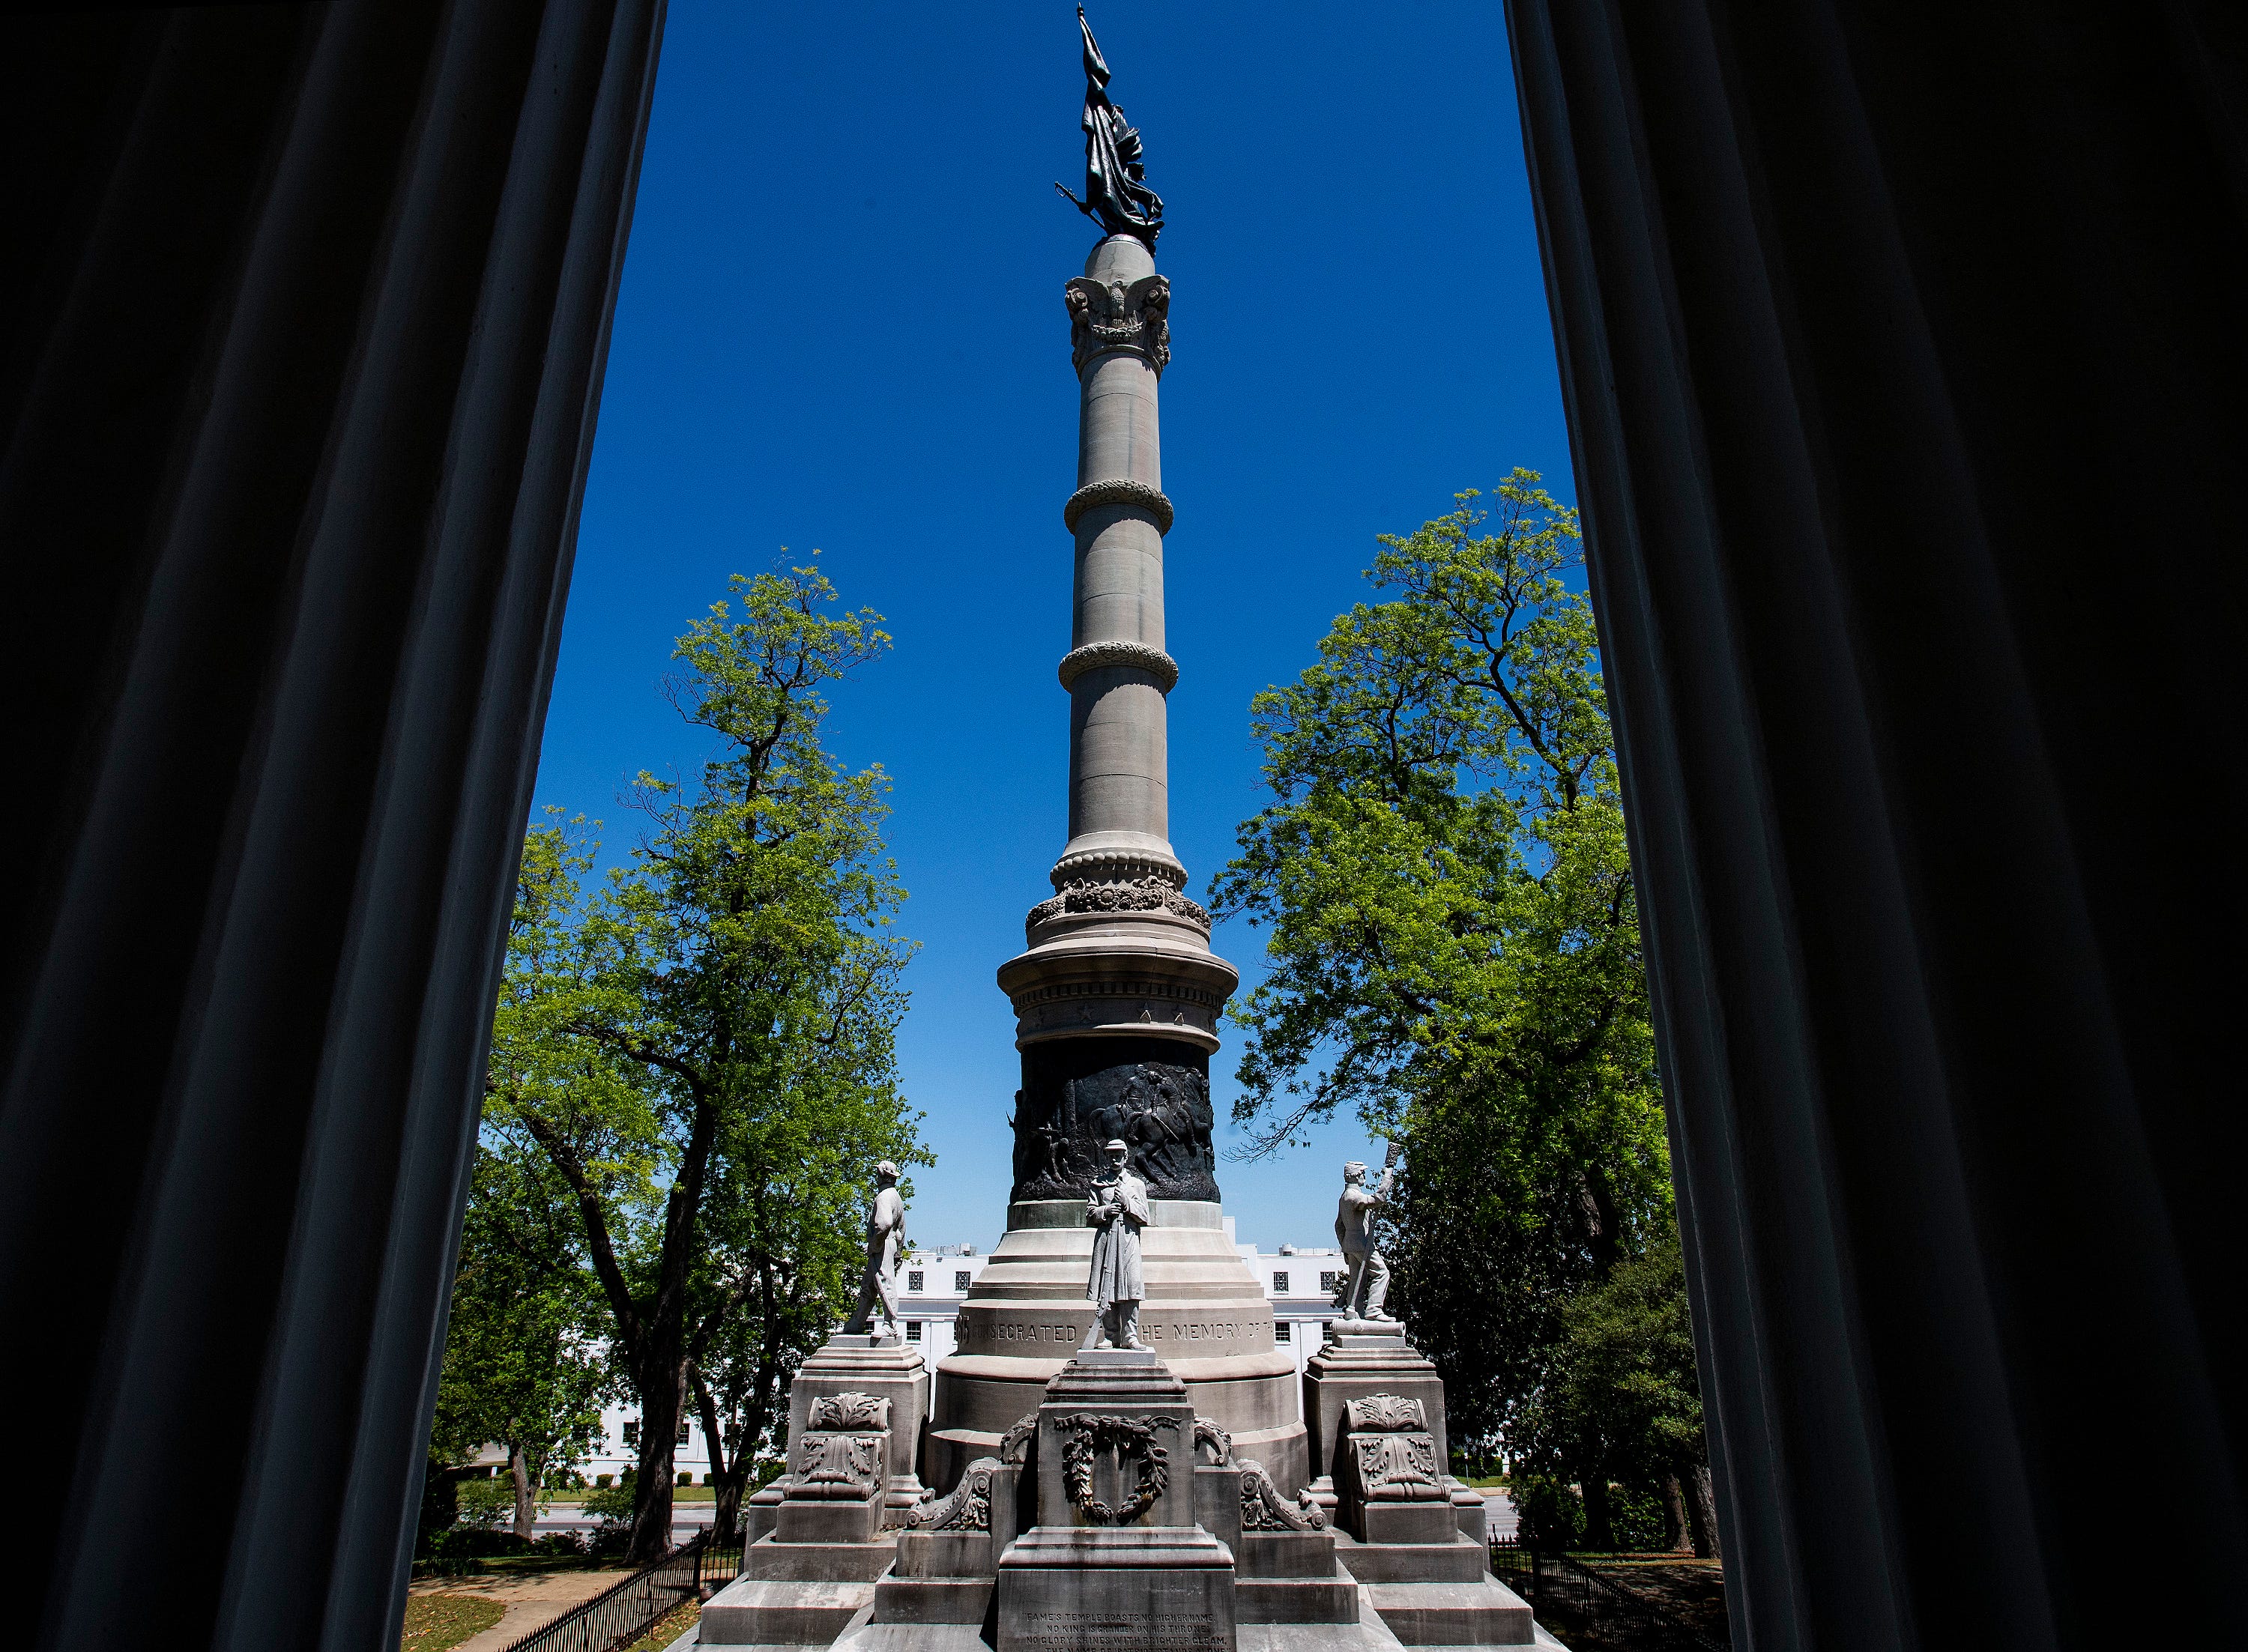 The Confederate Monument on the grounds of the Alabama State Capitol Building in Montgomery, Ala., on Confederate Memorial Day Monday April 27, 2020.